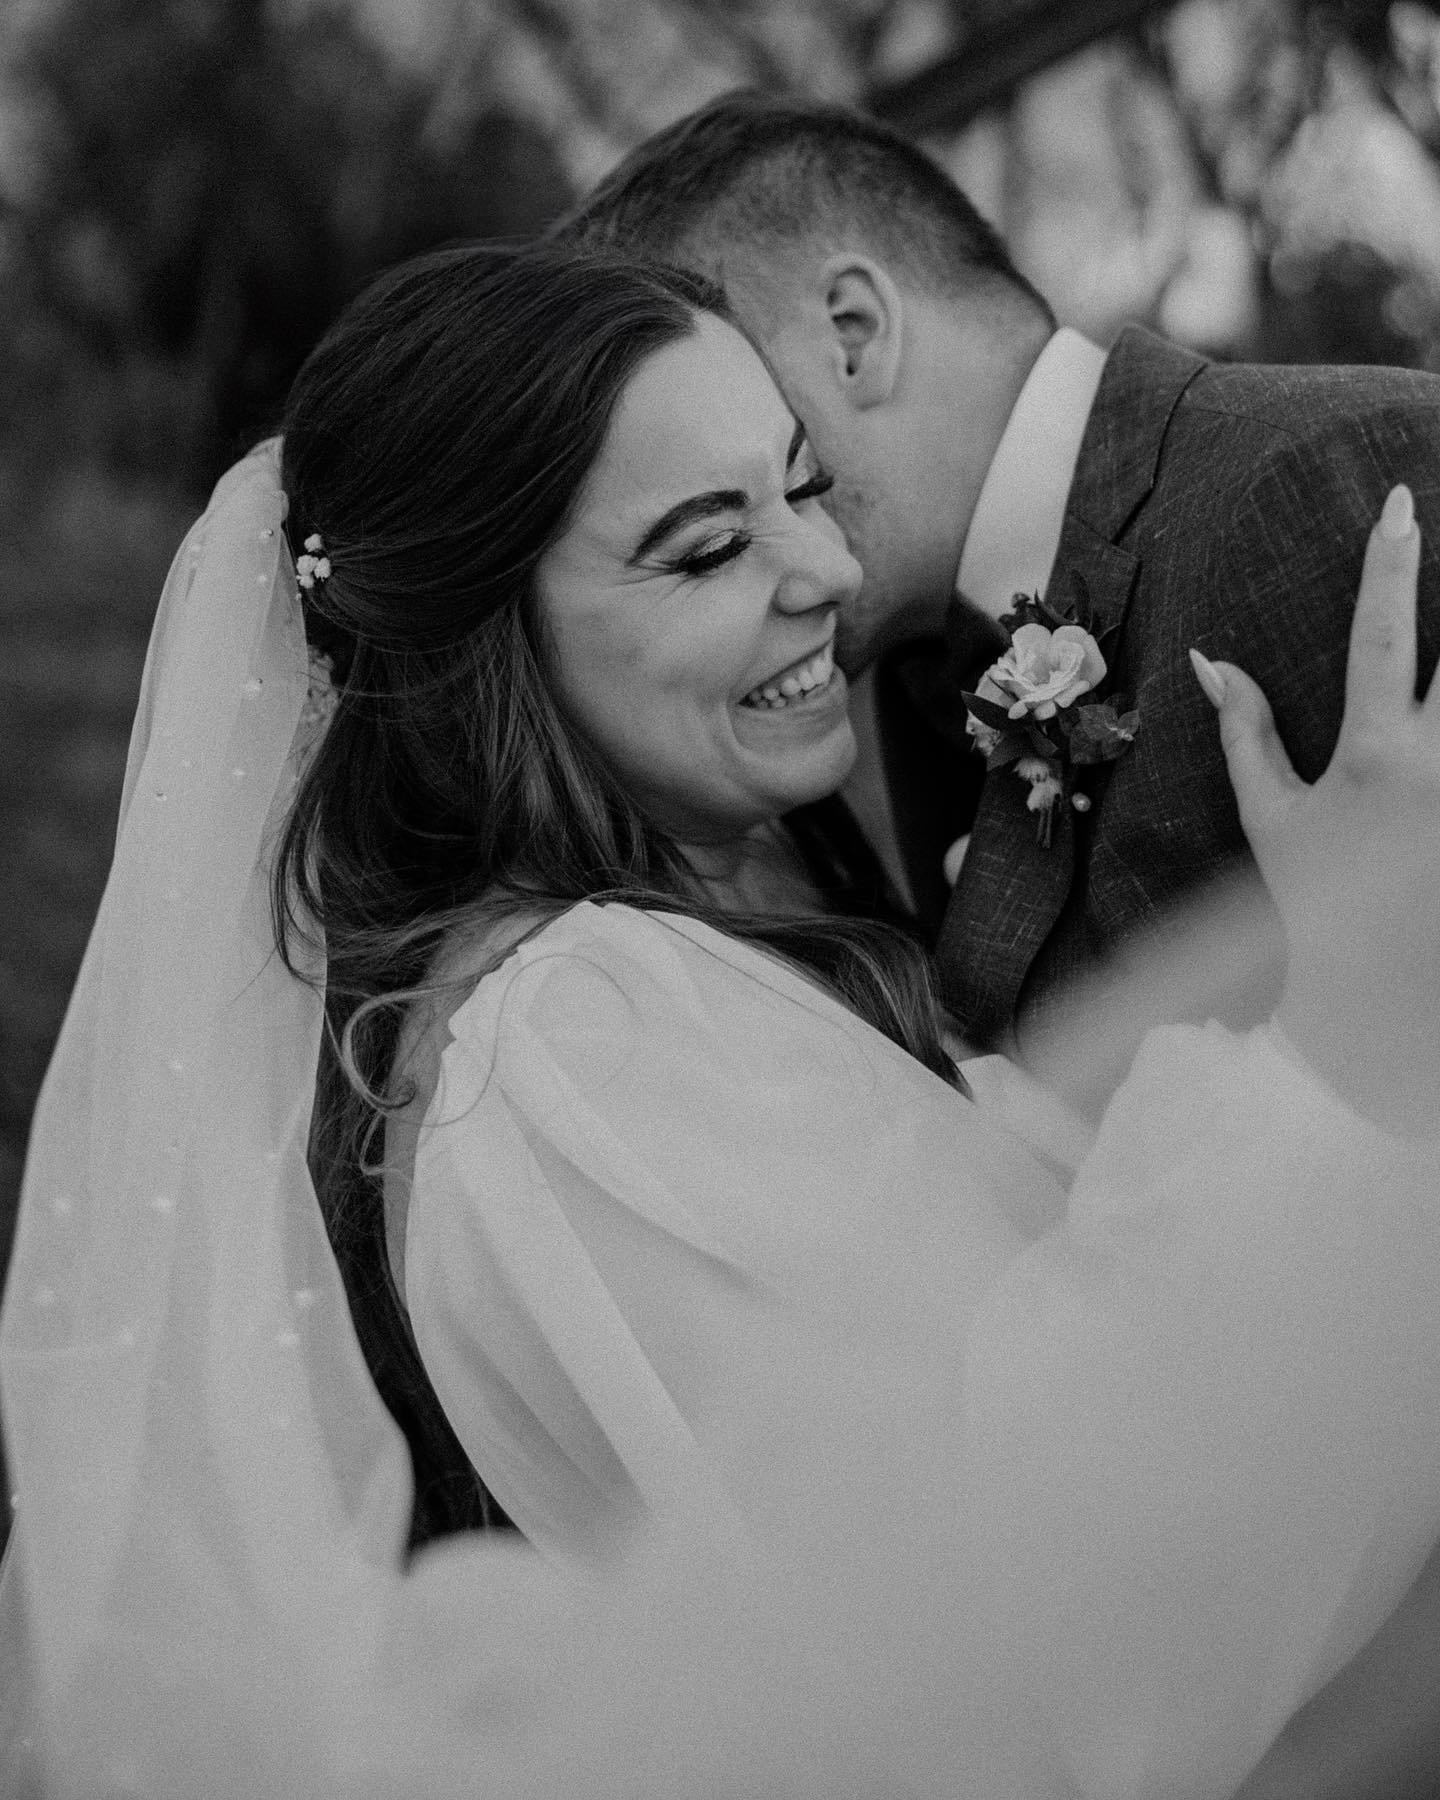 It&rsquo;s the emotions that really make the photos 🥺
&bull;
&bull;
&bull;
#coloradoweddingphotographer #weddingphotography #coloradophotographer #denverweddingphotographer #denverwedding #coloradowedding #theoaks #theoakswedding #theoaksatplumcreek